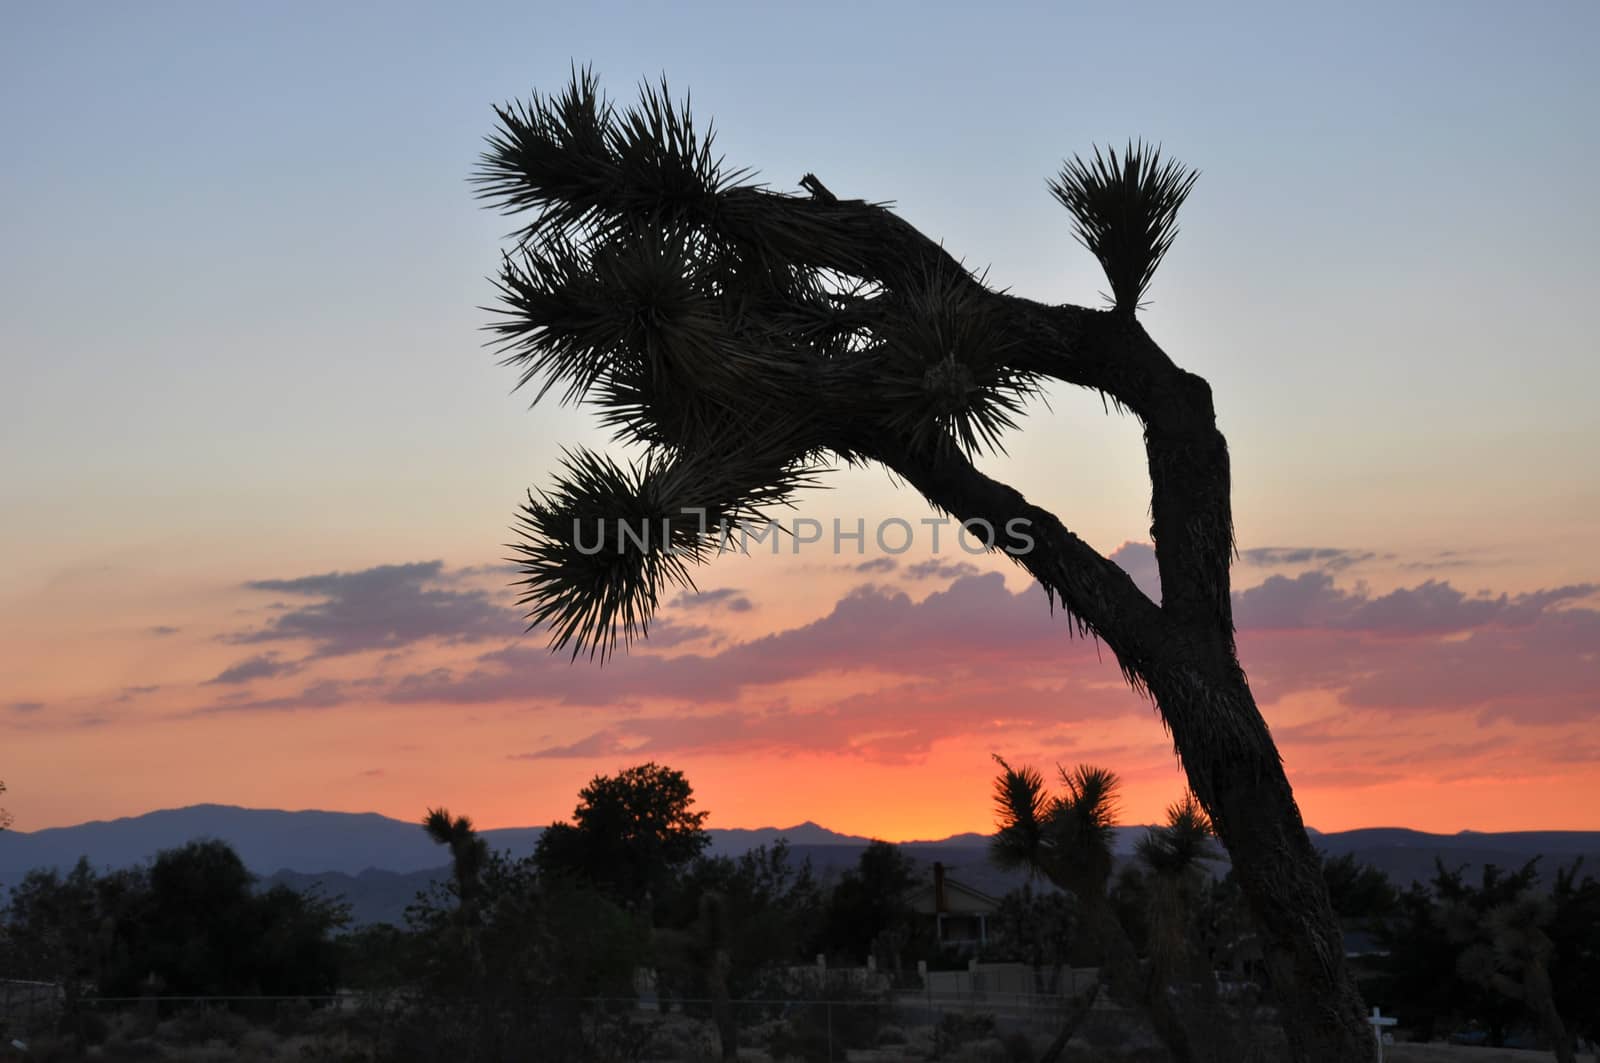 A single Joshua Tree is silhouetted against the sky at sunset in southern California.